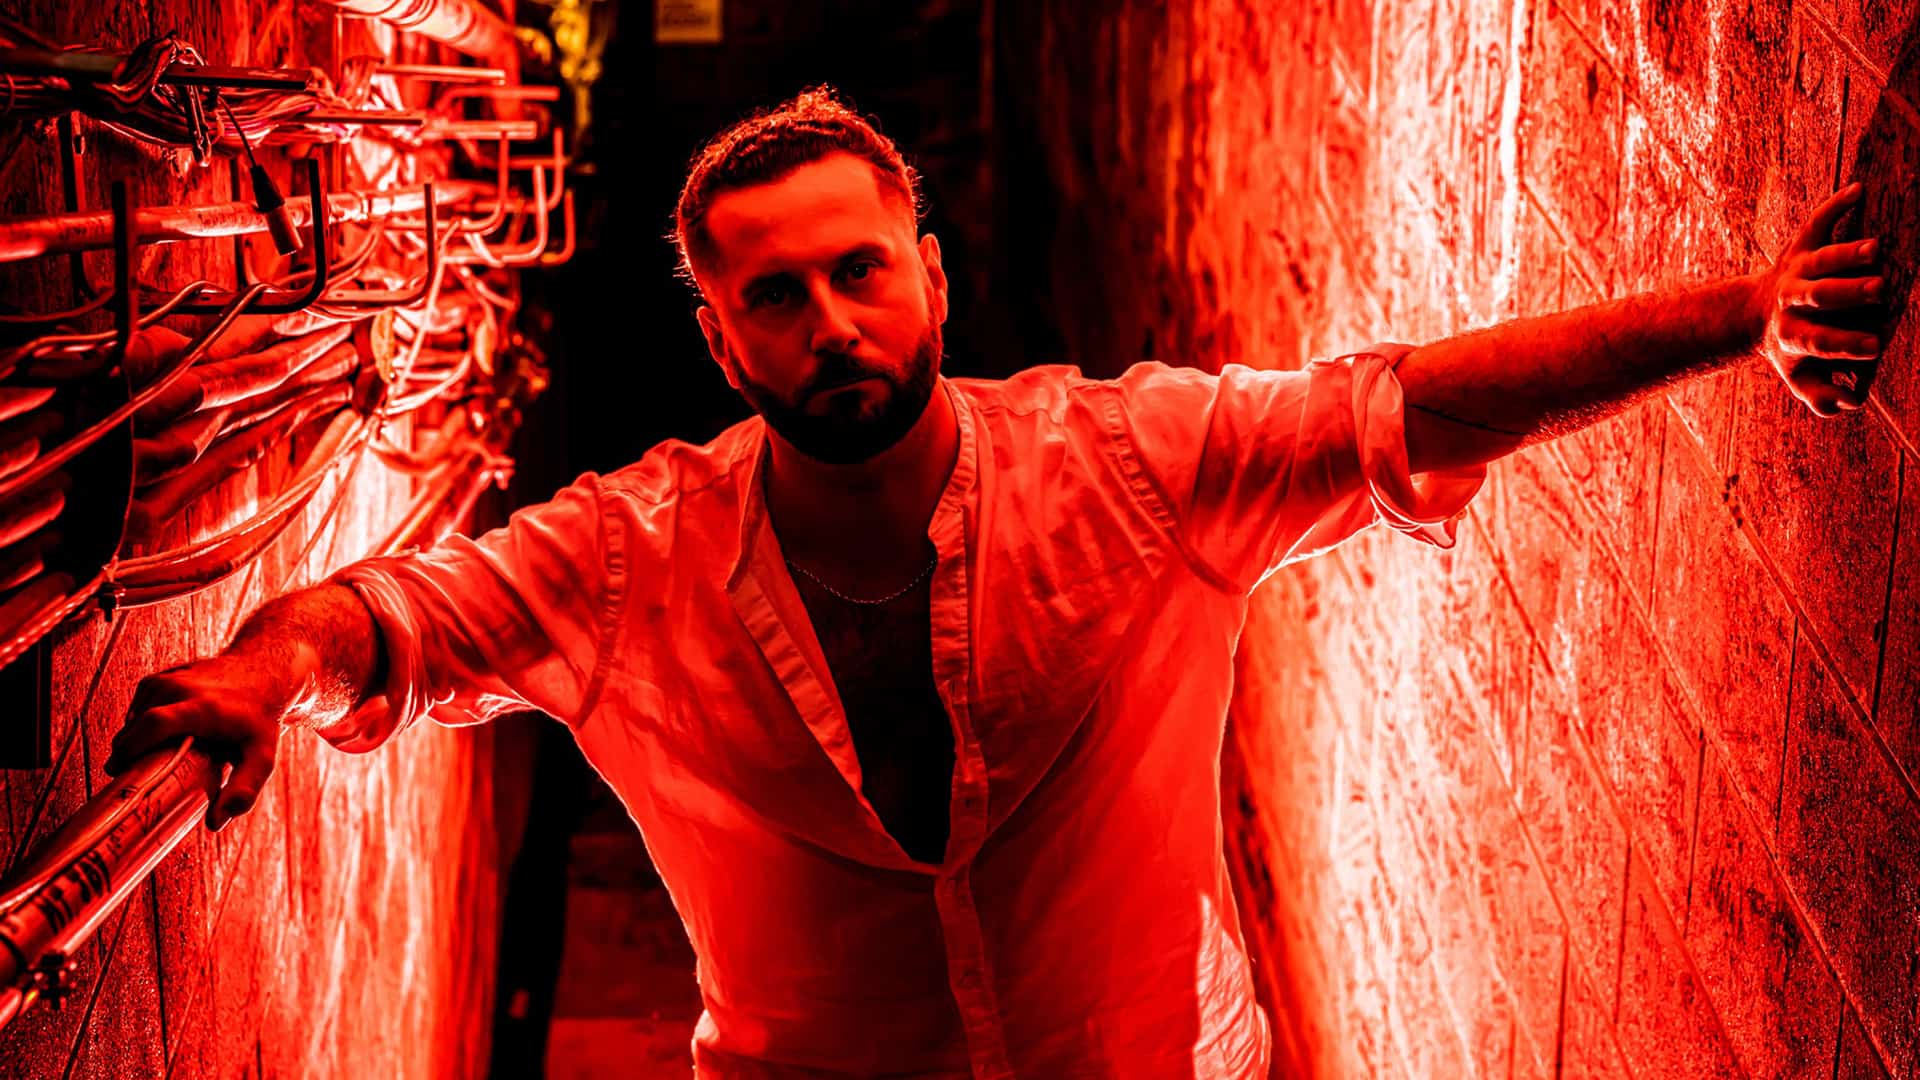 Elderbrook announces forthcoming ‘Innerlight’ EP and unveils new single ‘I'll Find My Way To You’